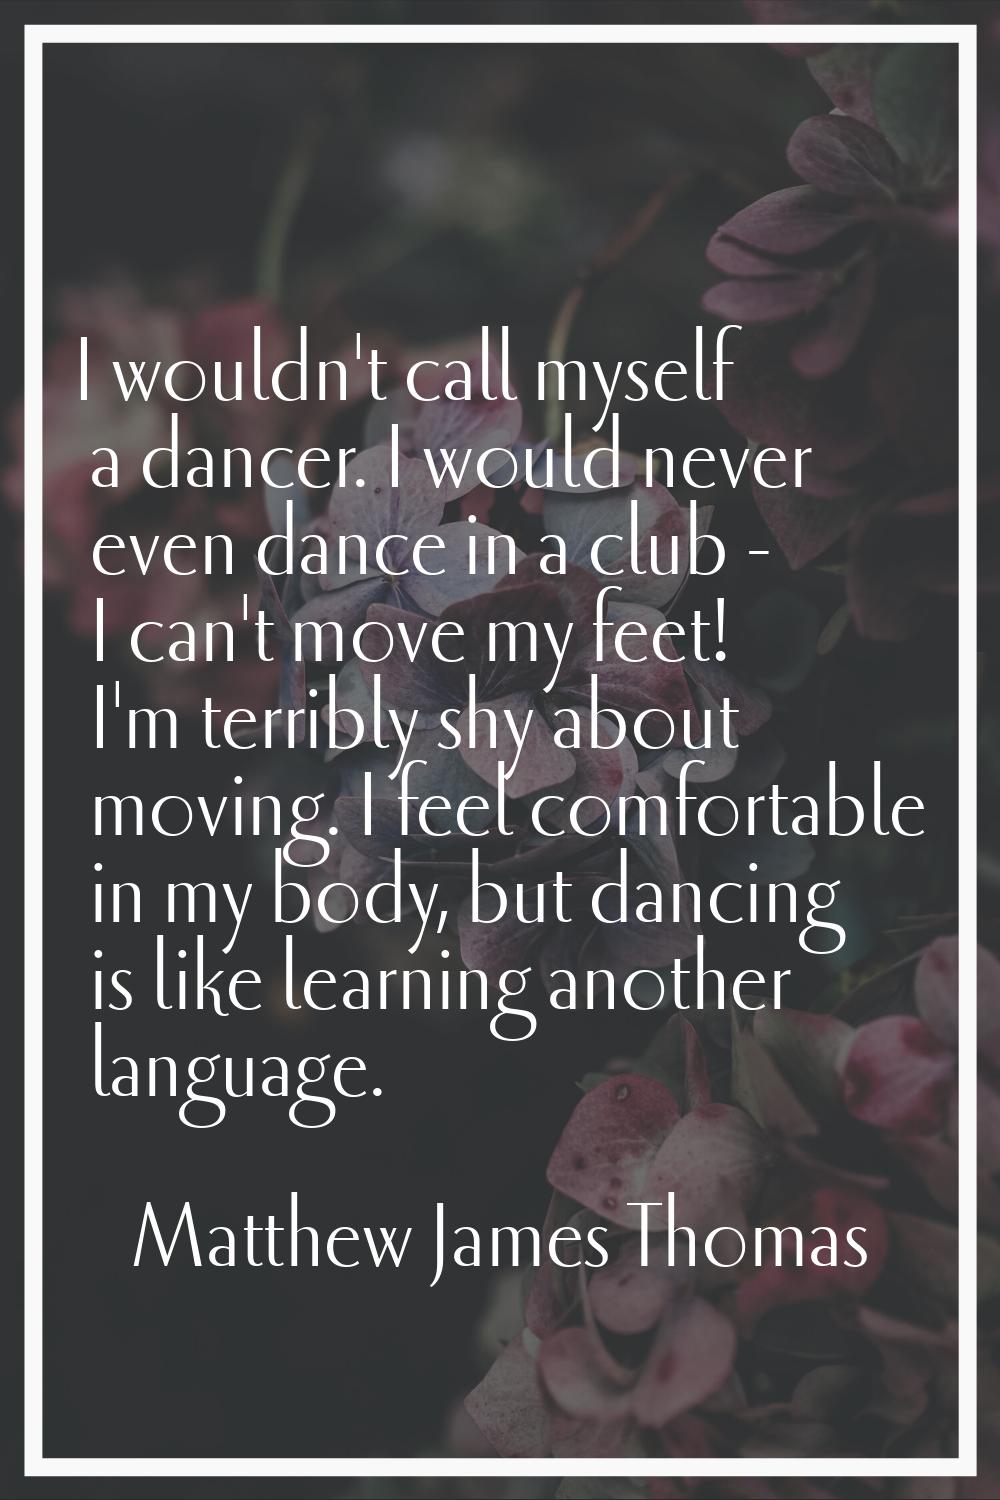 I wouldn't call myself a dancer. I would never even dance in a club - I can't move my feet! I'm ter